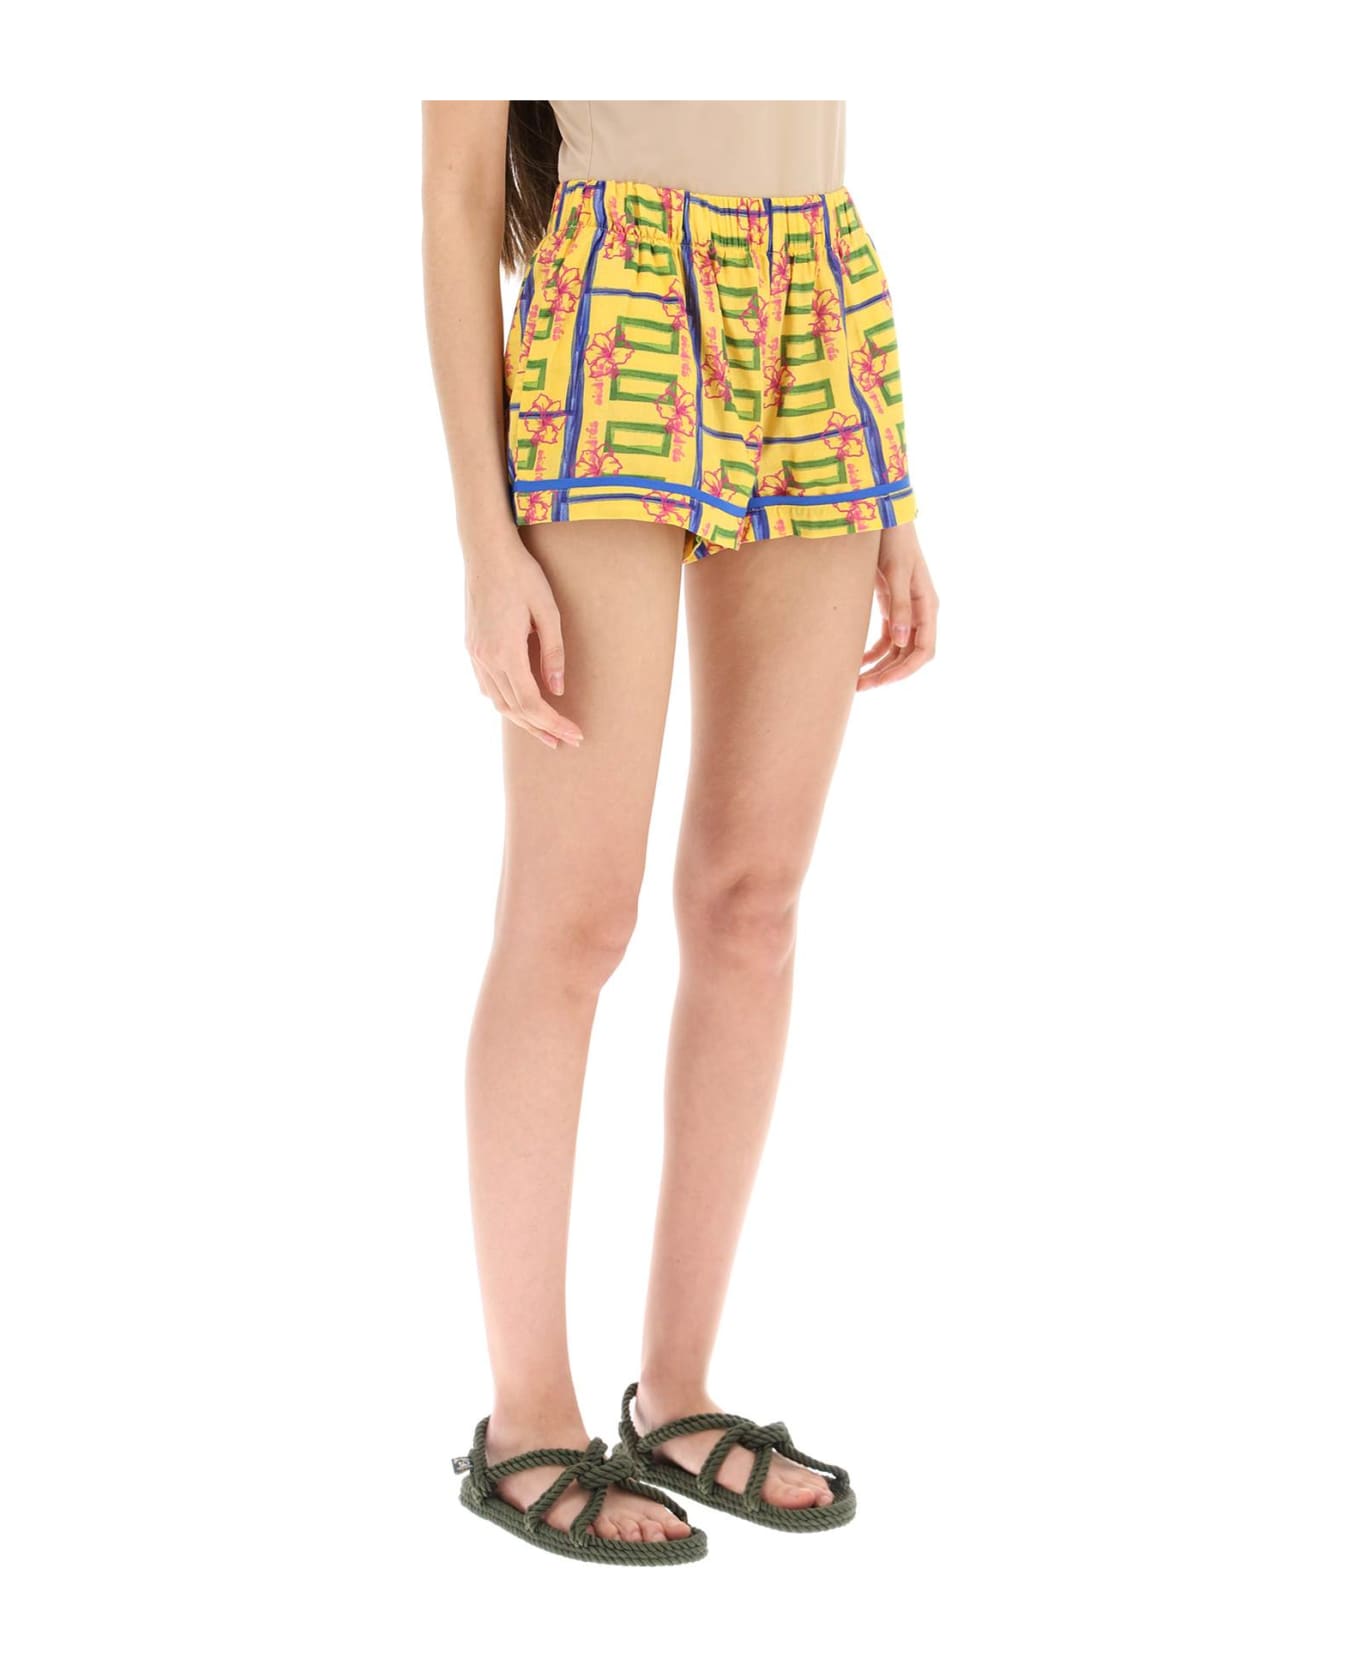 SIEDRES All-over Printed Cotton 'zyon' Shorts - MULTI (Yellow)